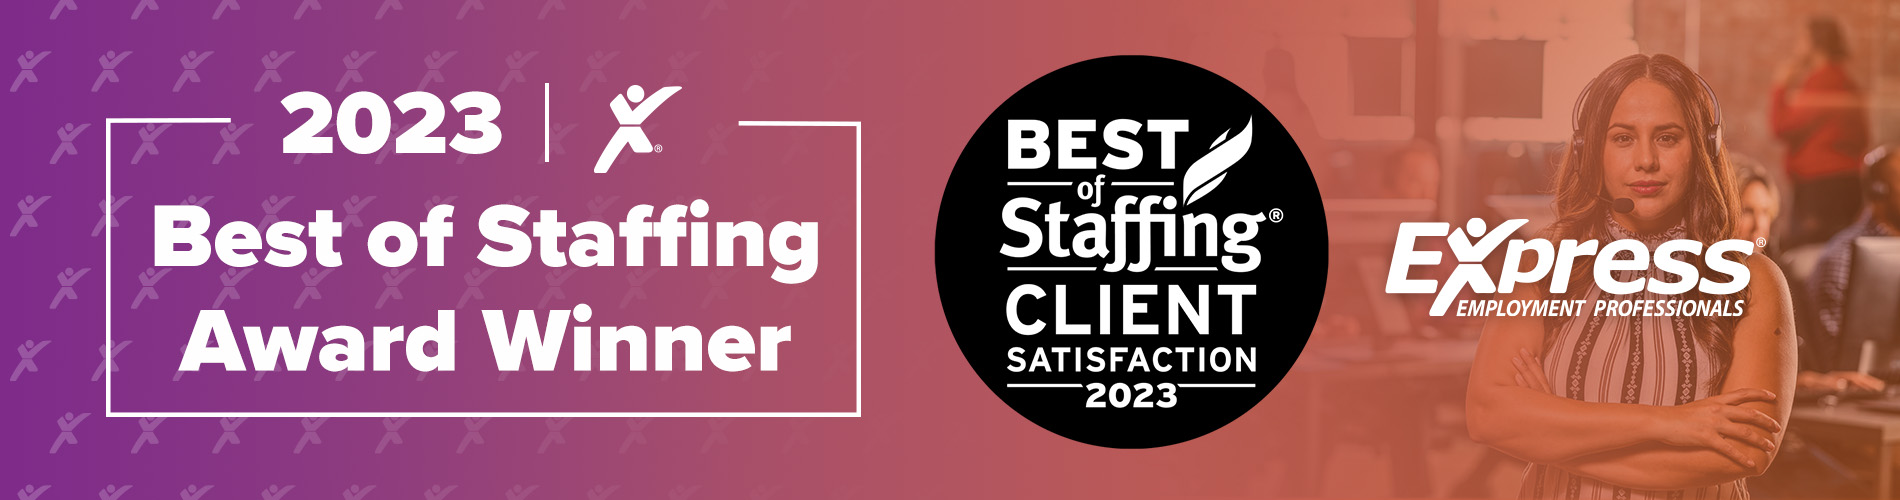 Best of Staffing Client Award Home Banner 2023